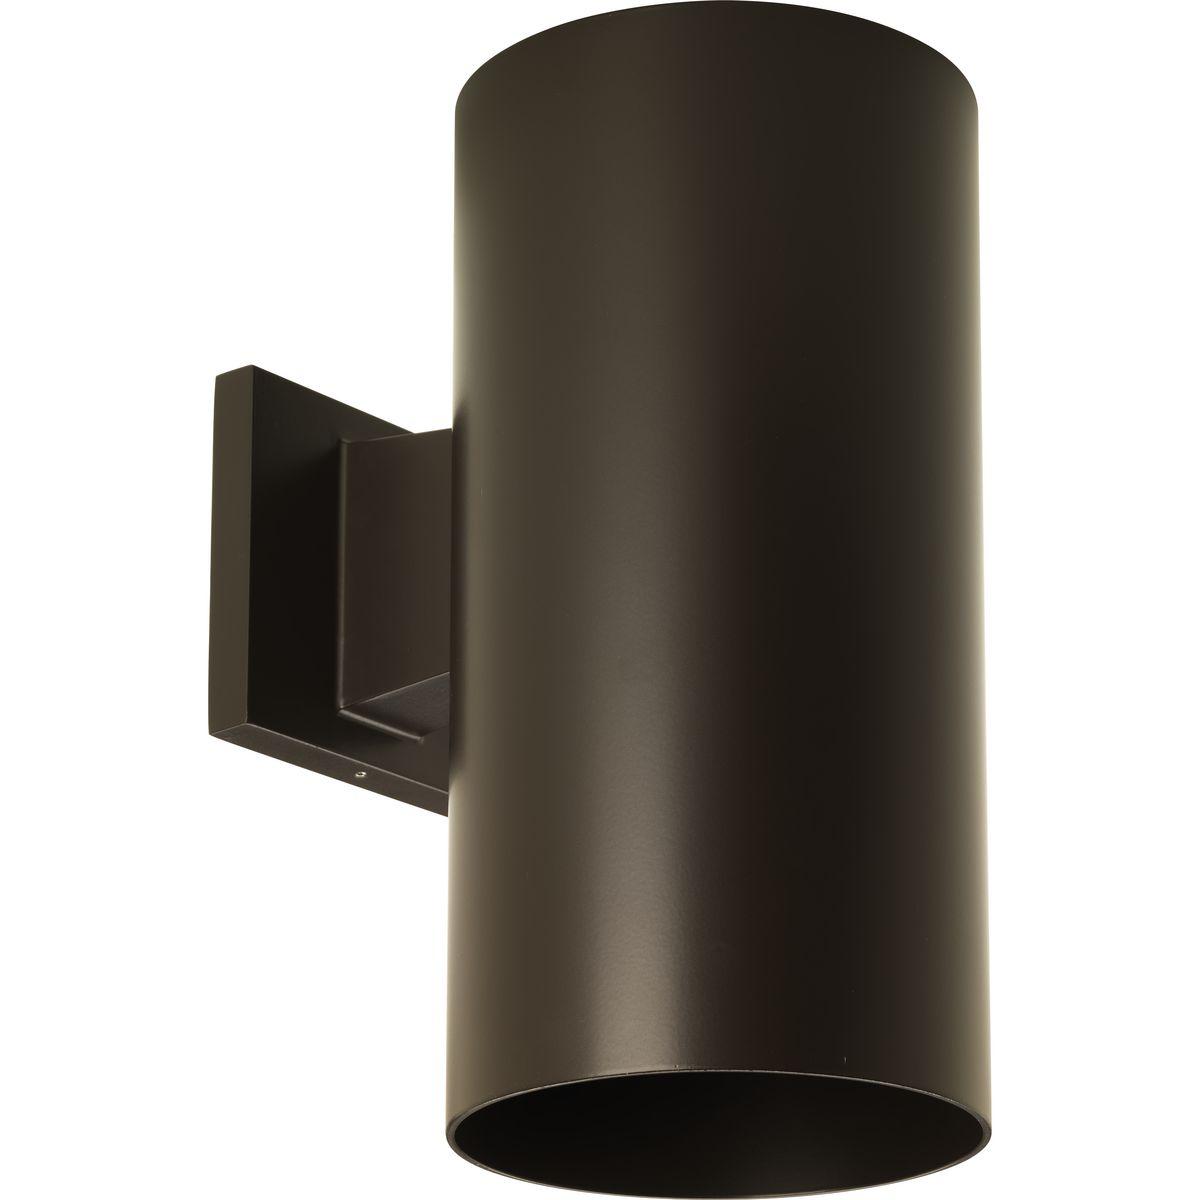 Hubbell P5641-20 6" downlight wall cylinders are ideal for a wide variety of interior and exterior applications including residential and commercial. The aluminum Cylinders offers a contemporary design with its sleek cylindrical form and elegant Antique Bronze finish, per